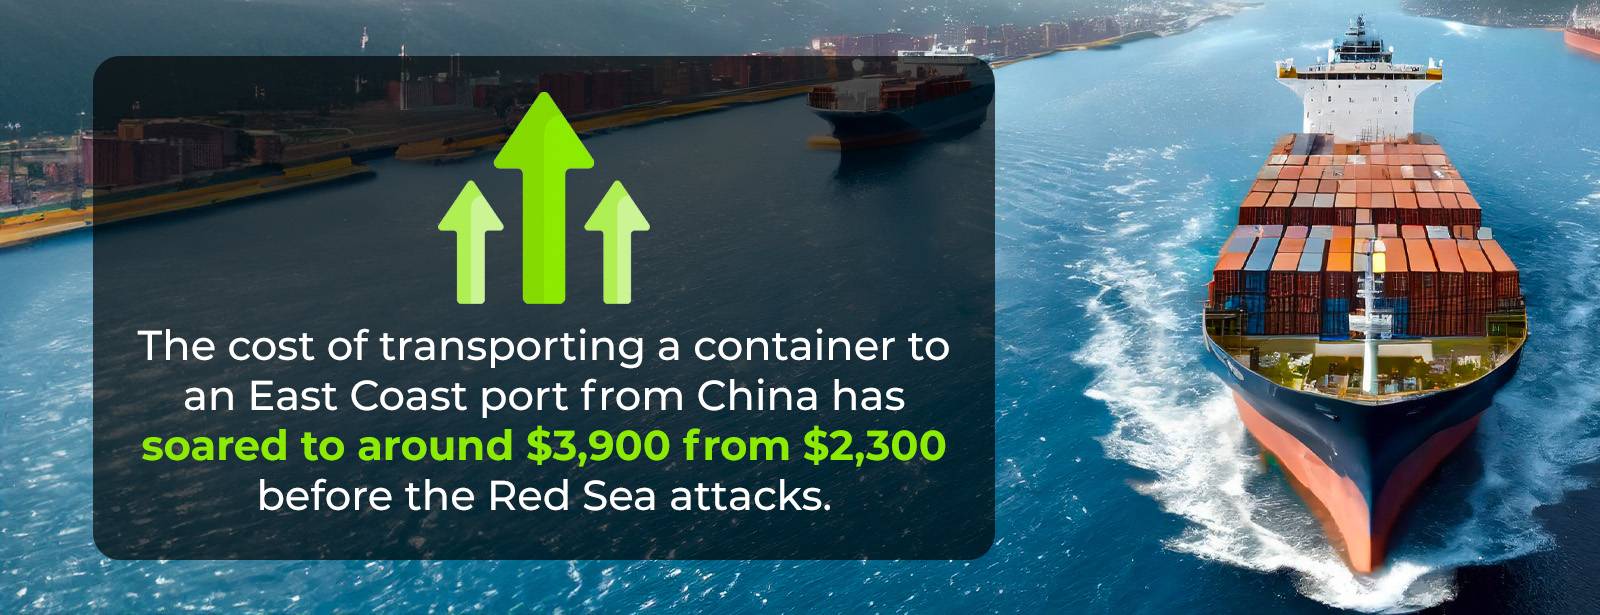 Cost of transporting a container via Red Sea see 2x rise.